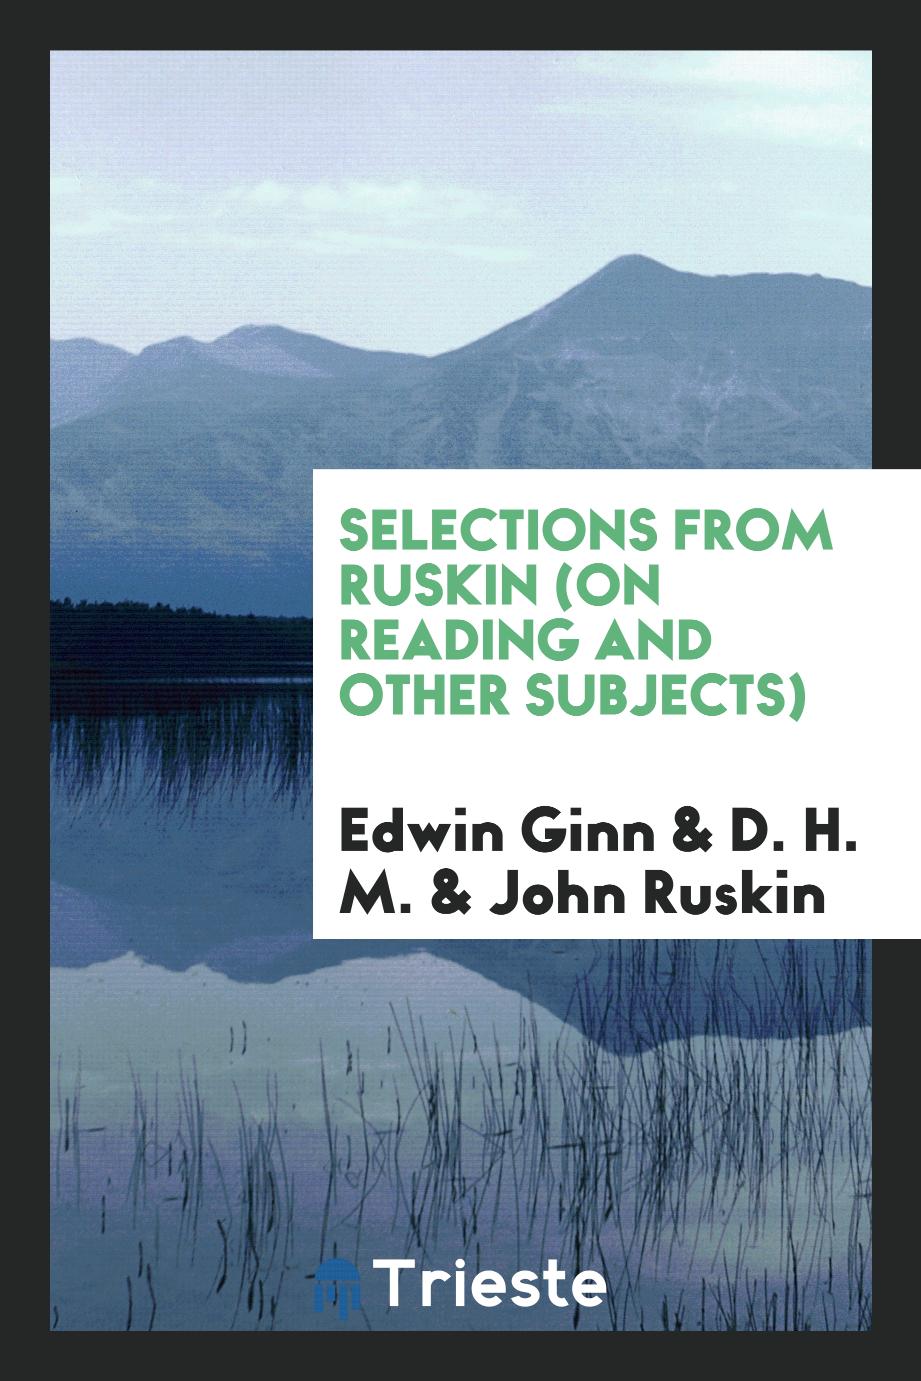 Selections from Ruskin (on Reading and Other Subjects)